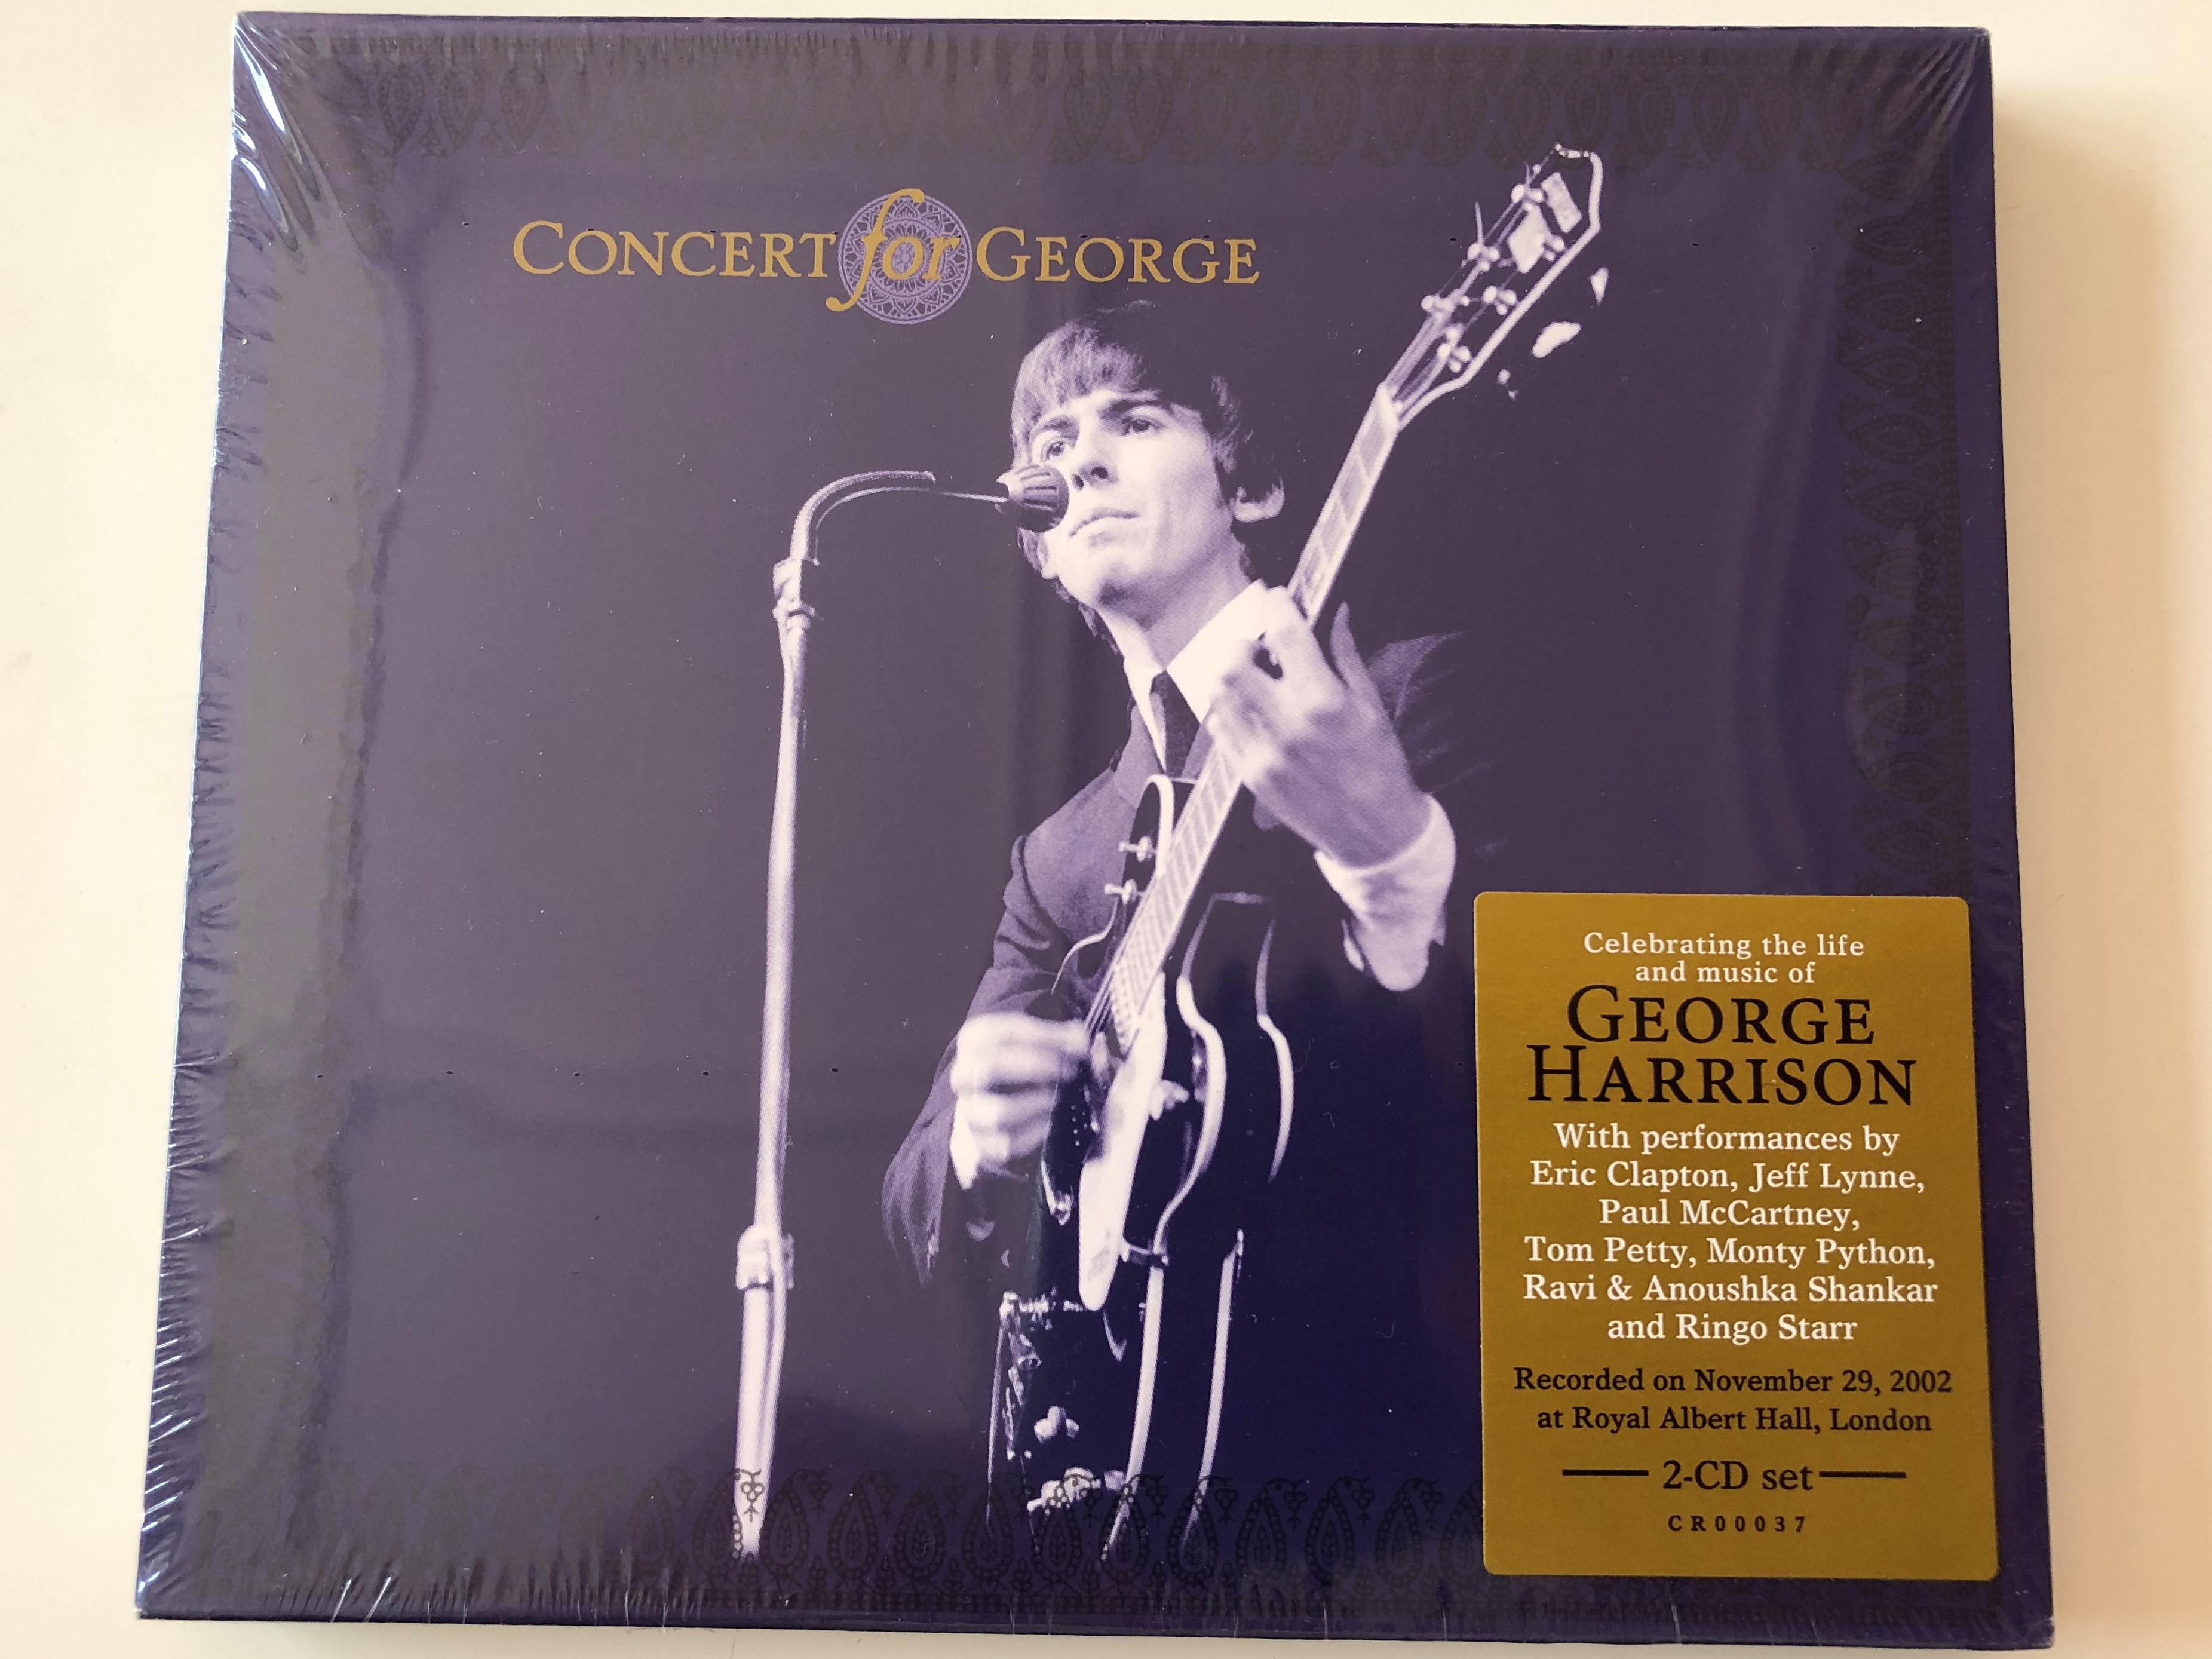 concert-for-george-celebrating-the-life-and-music-of-george-harrison-with-performances-by-eric-clapton-jeff-lynne-paul-mccartney-tom-petty-monty-python-ravi-anoushka-shankar-and-ringo-sta-1-.jpg